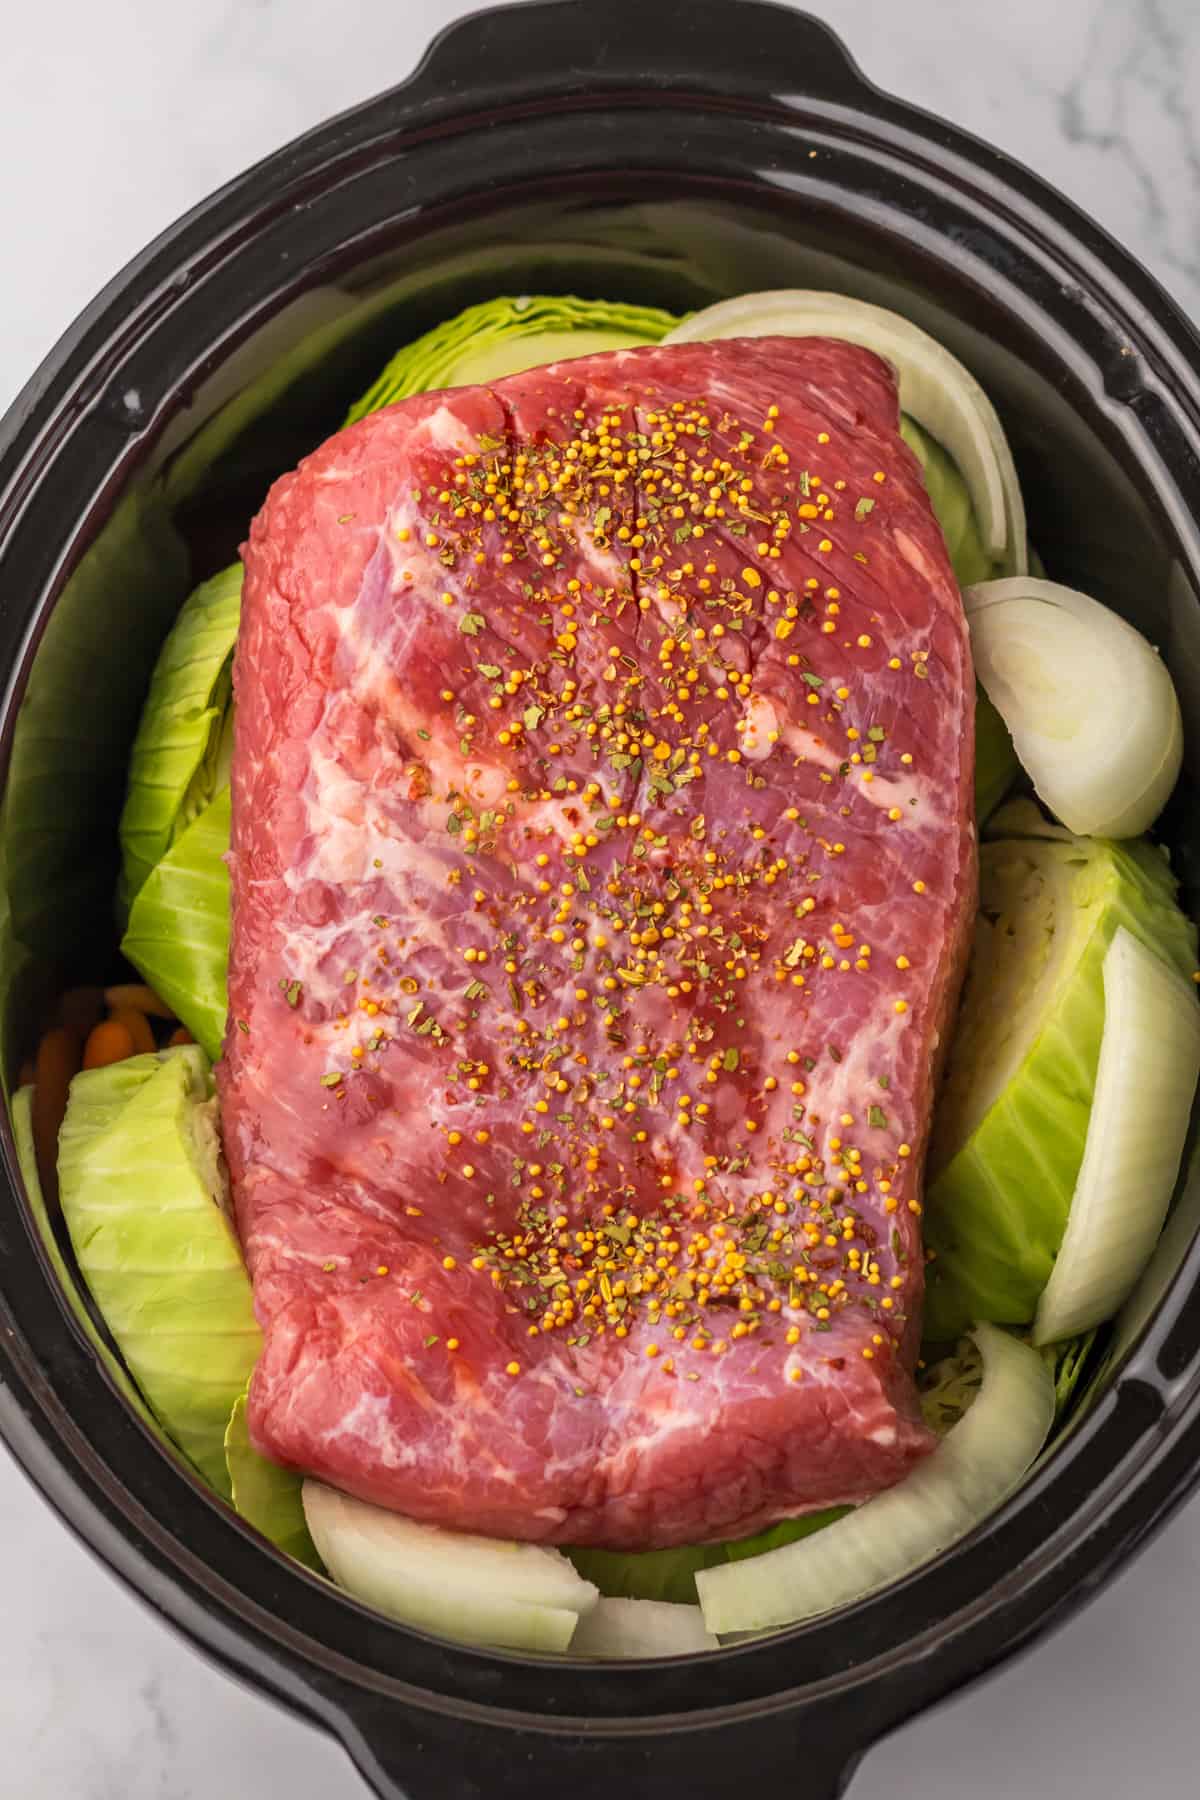 Corned beef in crockpot surrounded by cabbage, onions, and carrots.